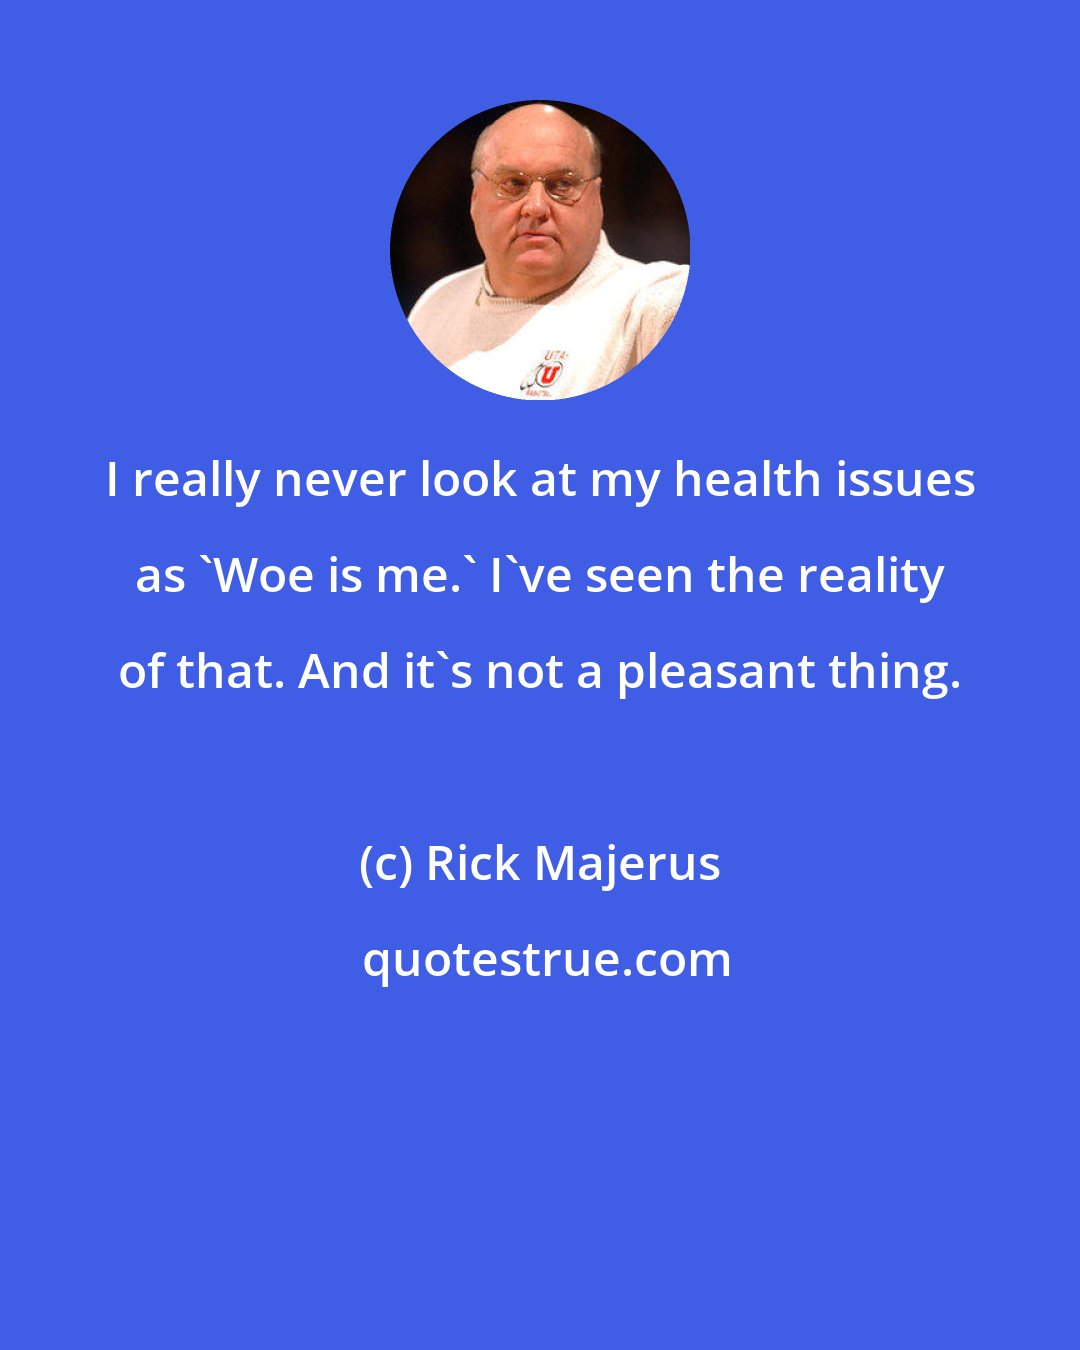 Rick Majerus: I really never look at my health issues as 'Woe is me.' I've seen the reality of that. And it's not a pleasant thing.